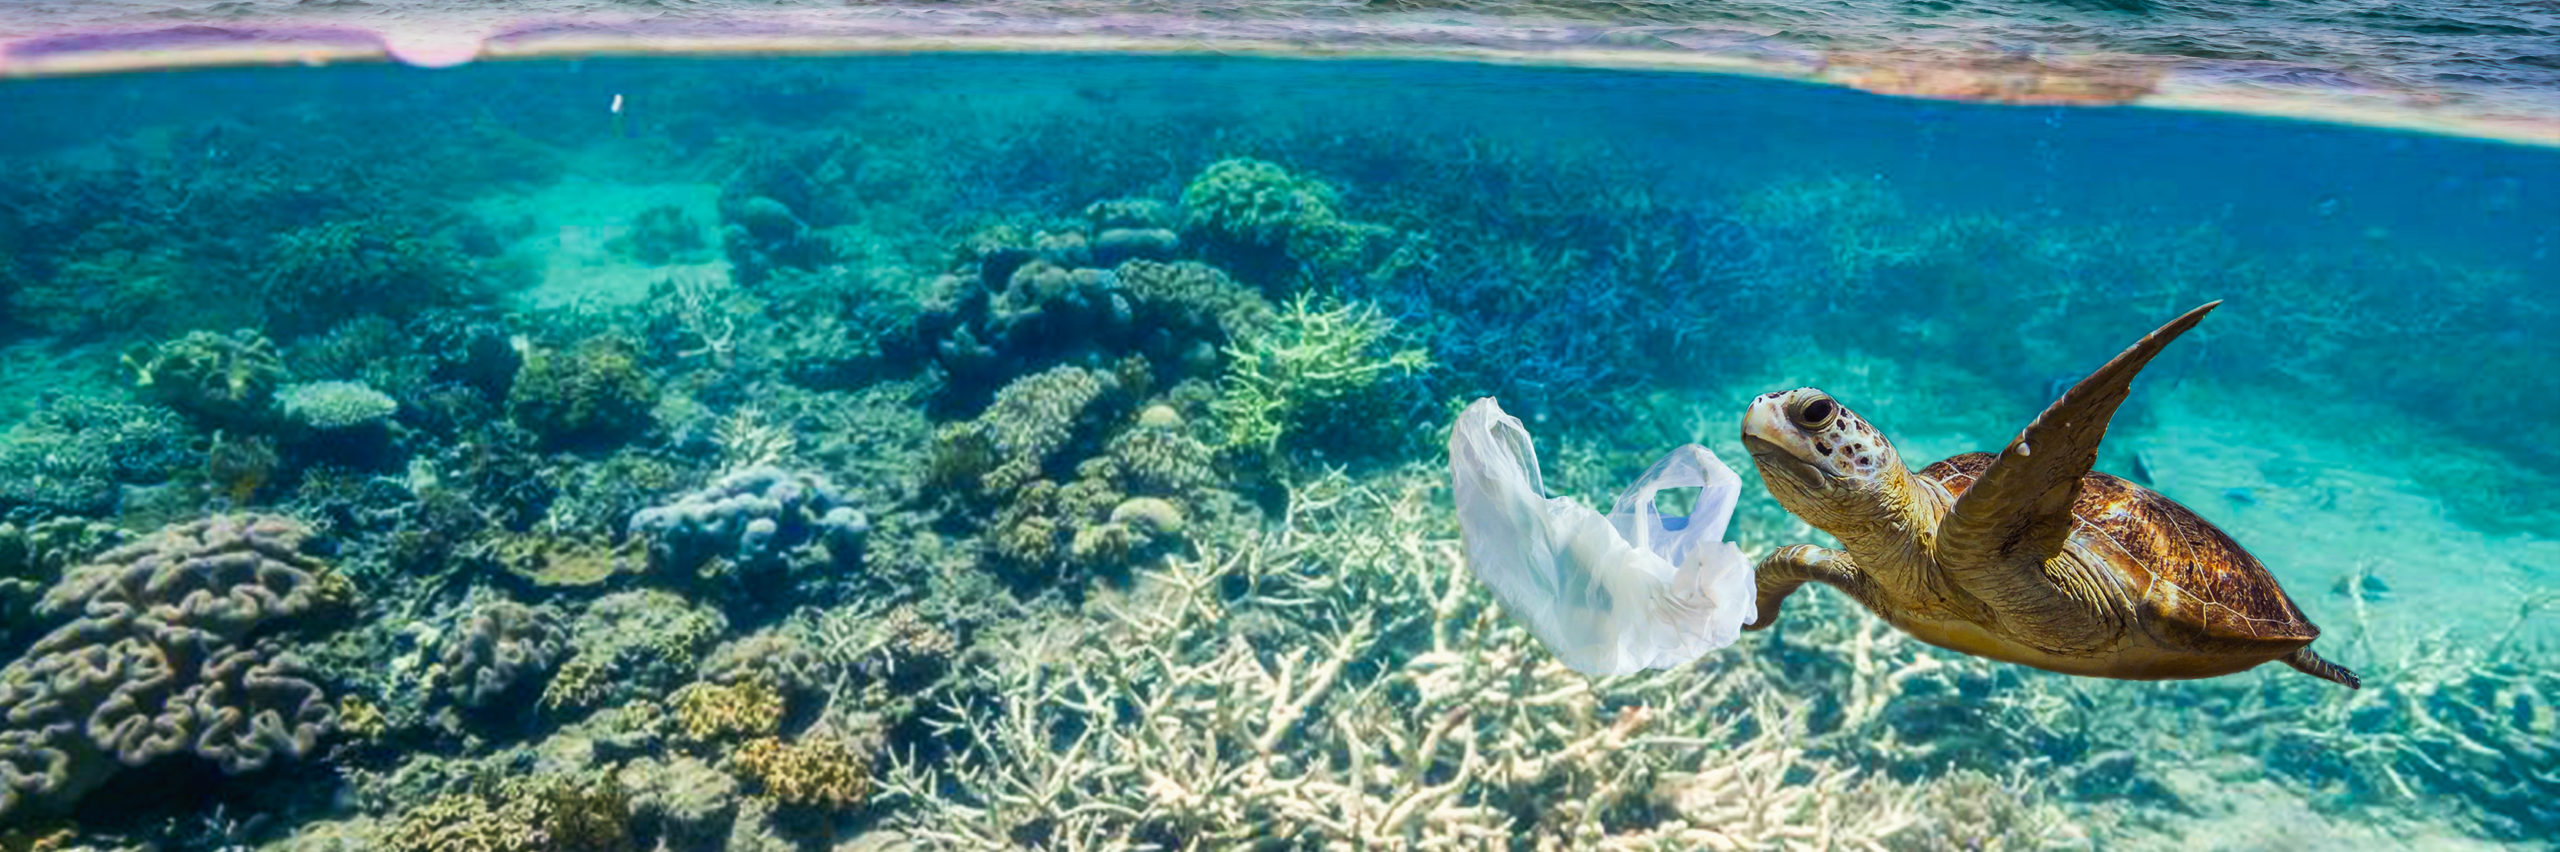 Drifting plastic bag and a turtle - Image [Shutterstock]